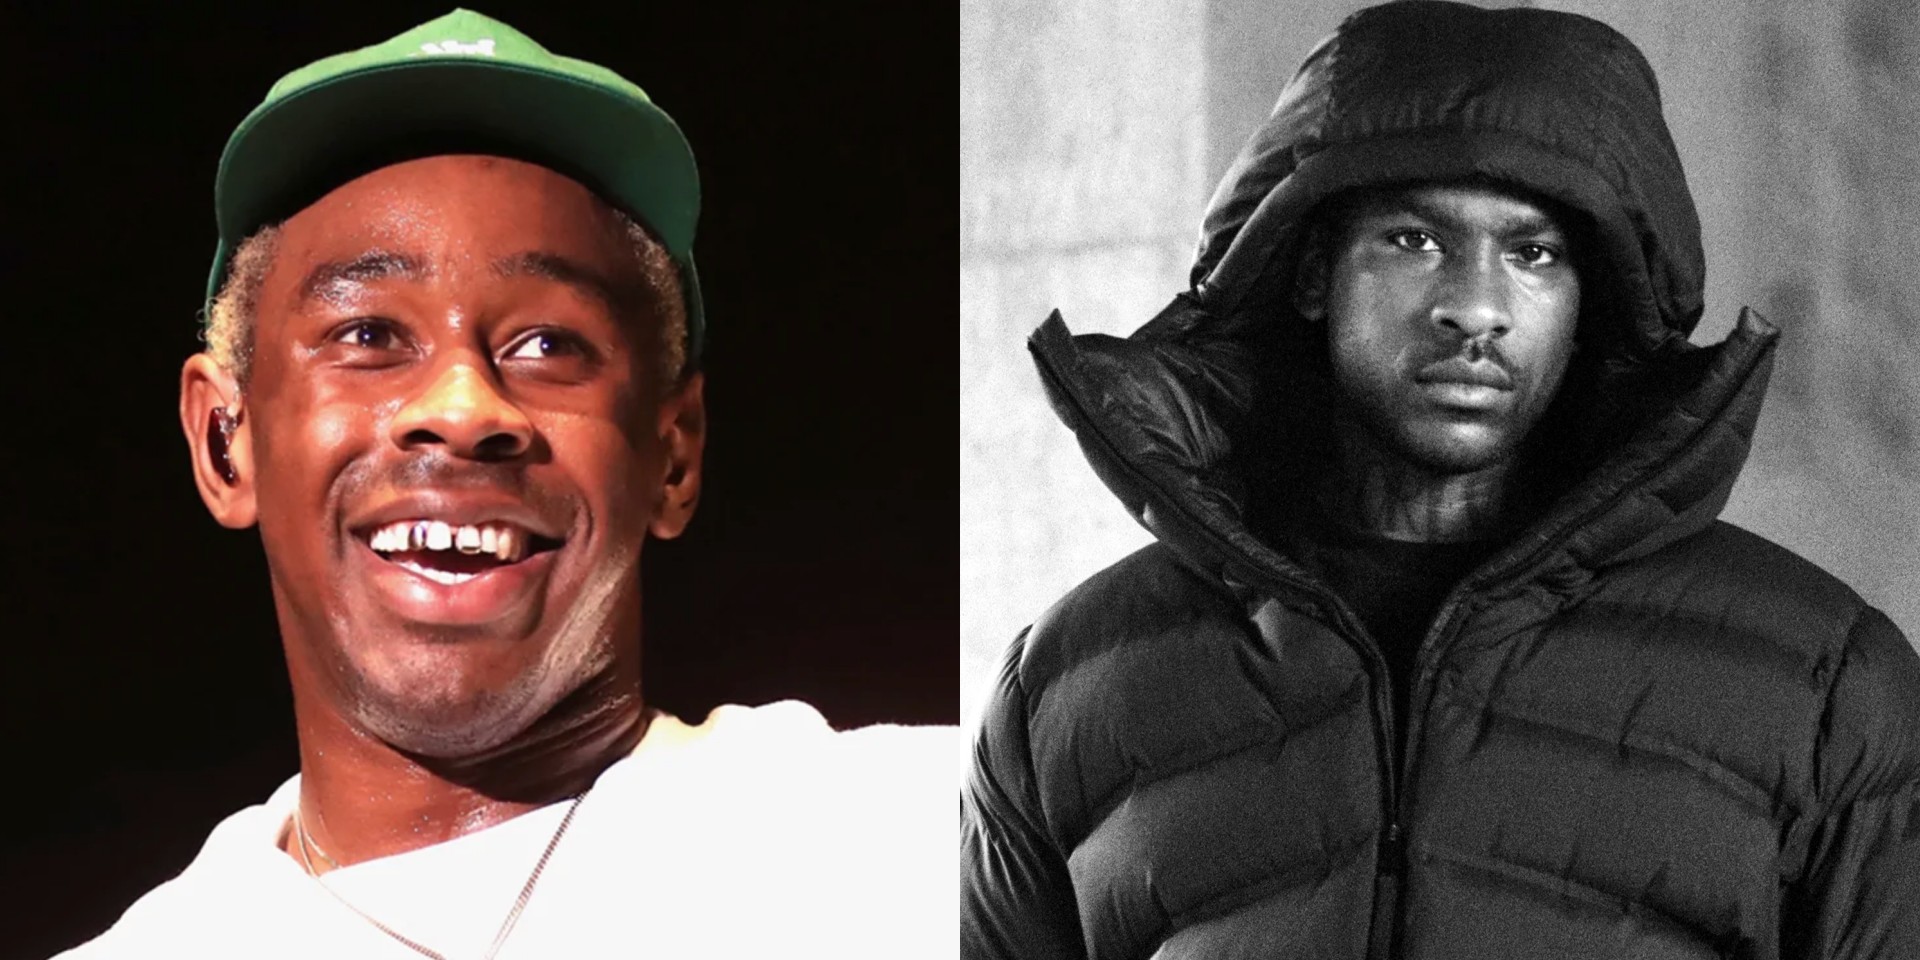 Tyler, the Creator and Skepta will perform at the Beyond the Valley festival in Australia in December 